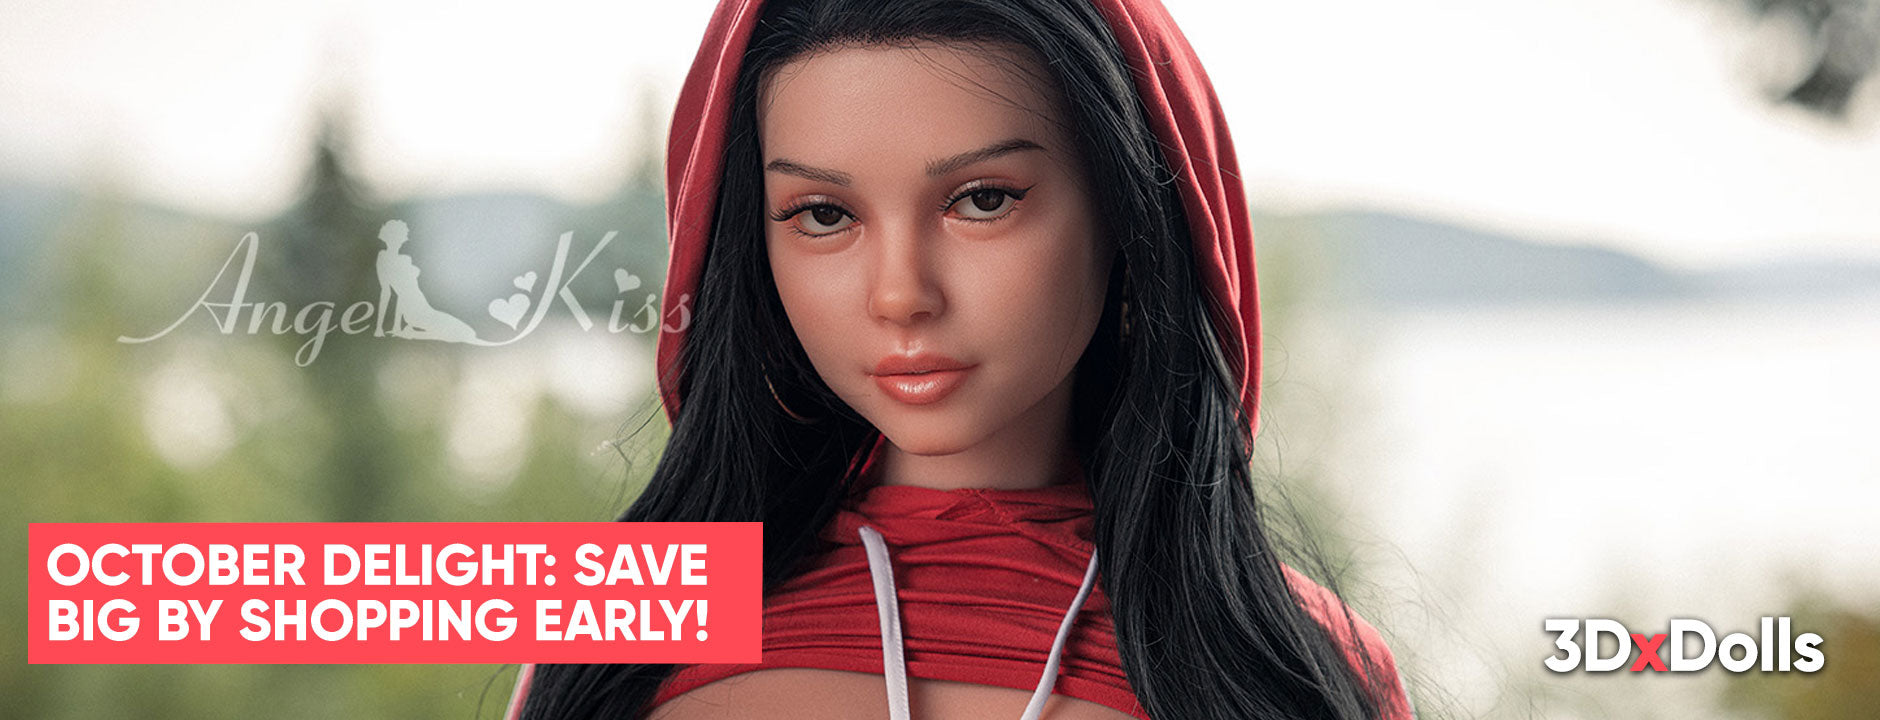 October Delight: Get Your Love Doll Sooner and Save Big